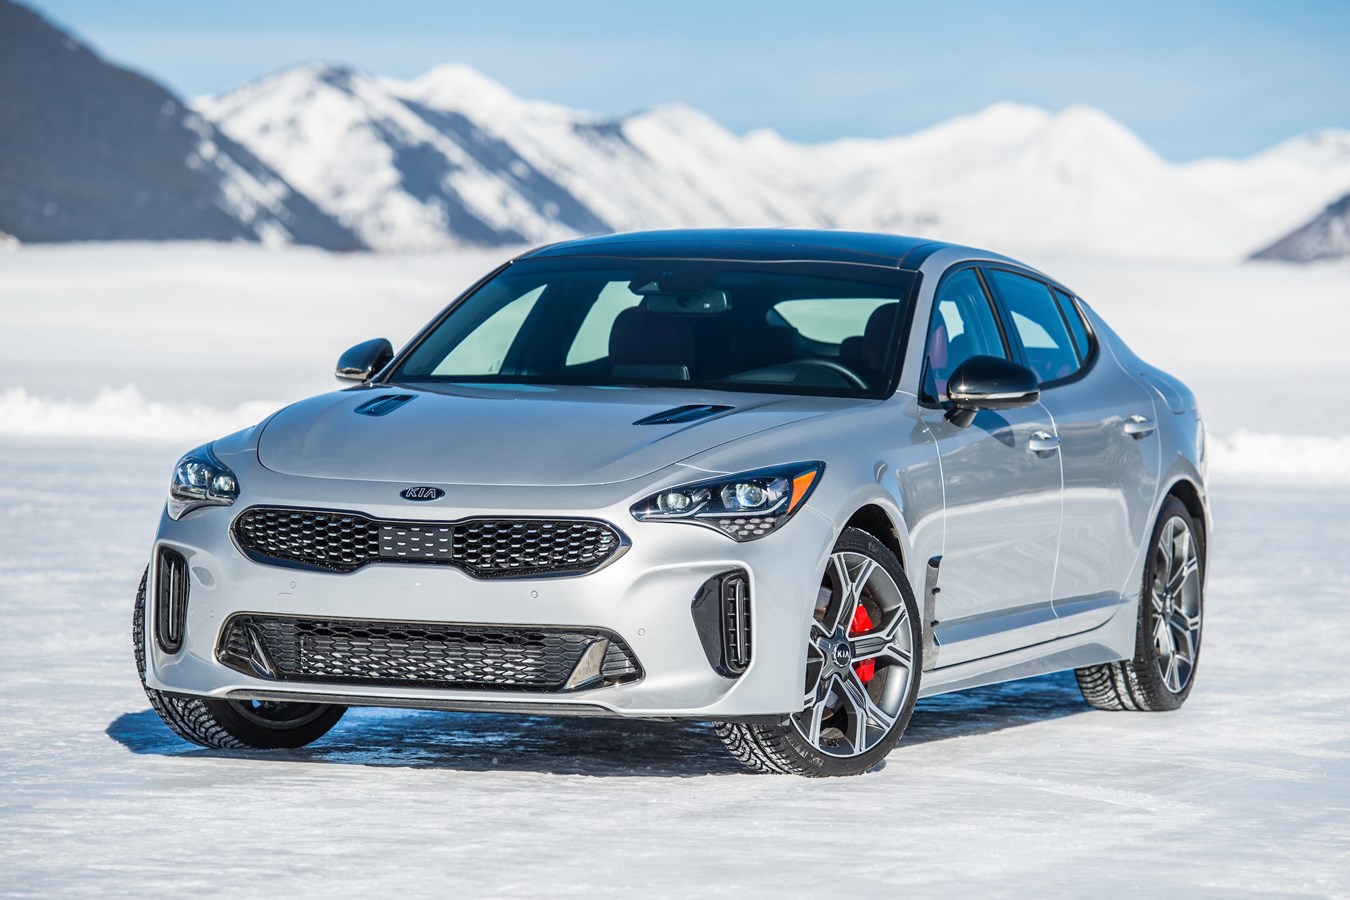 What's under the hood of the 2021 Kia Stinger?